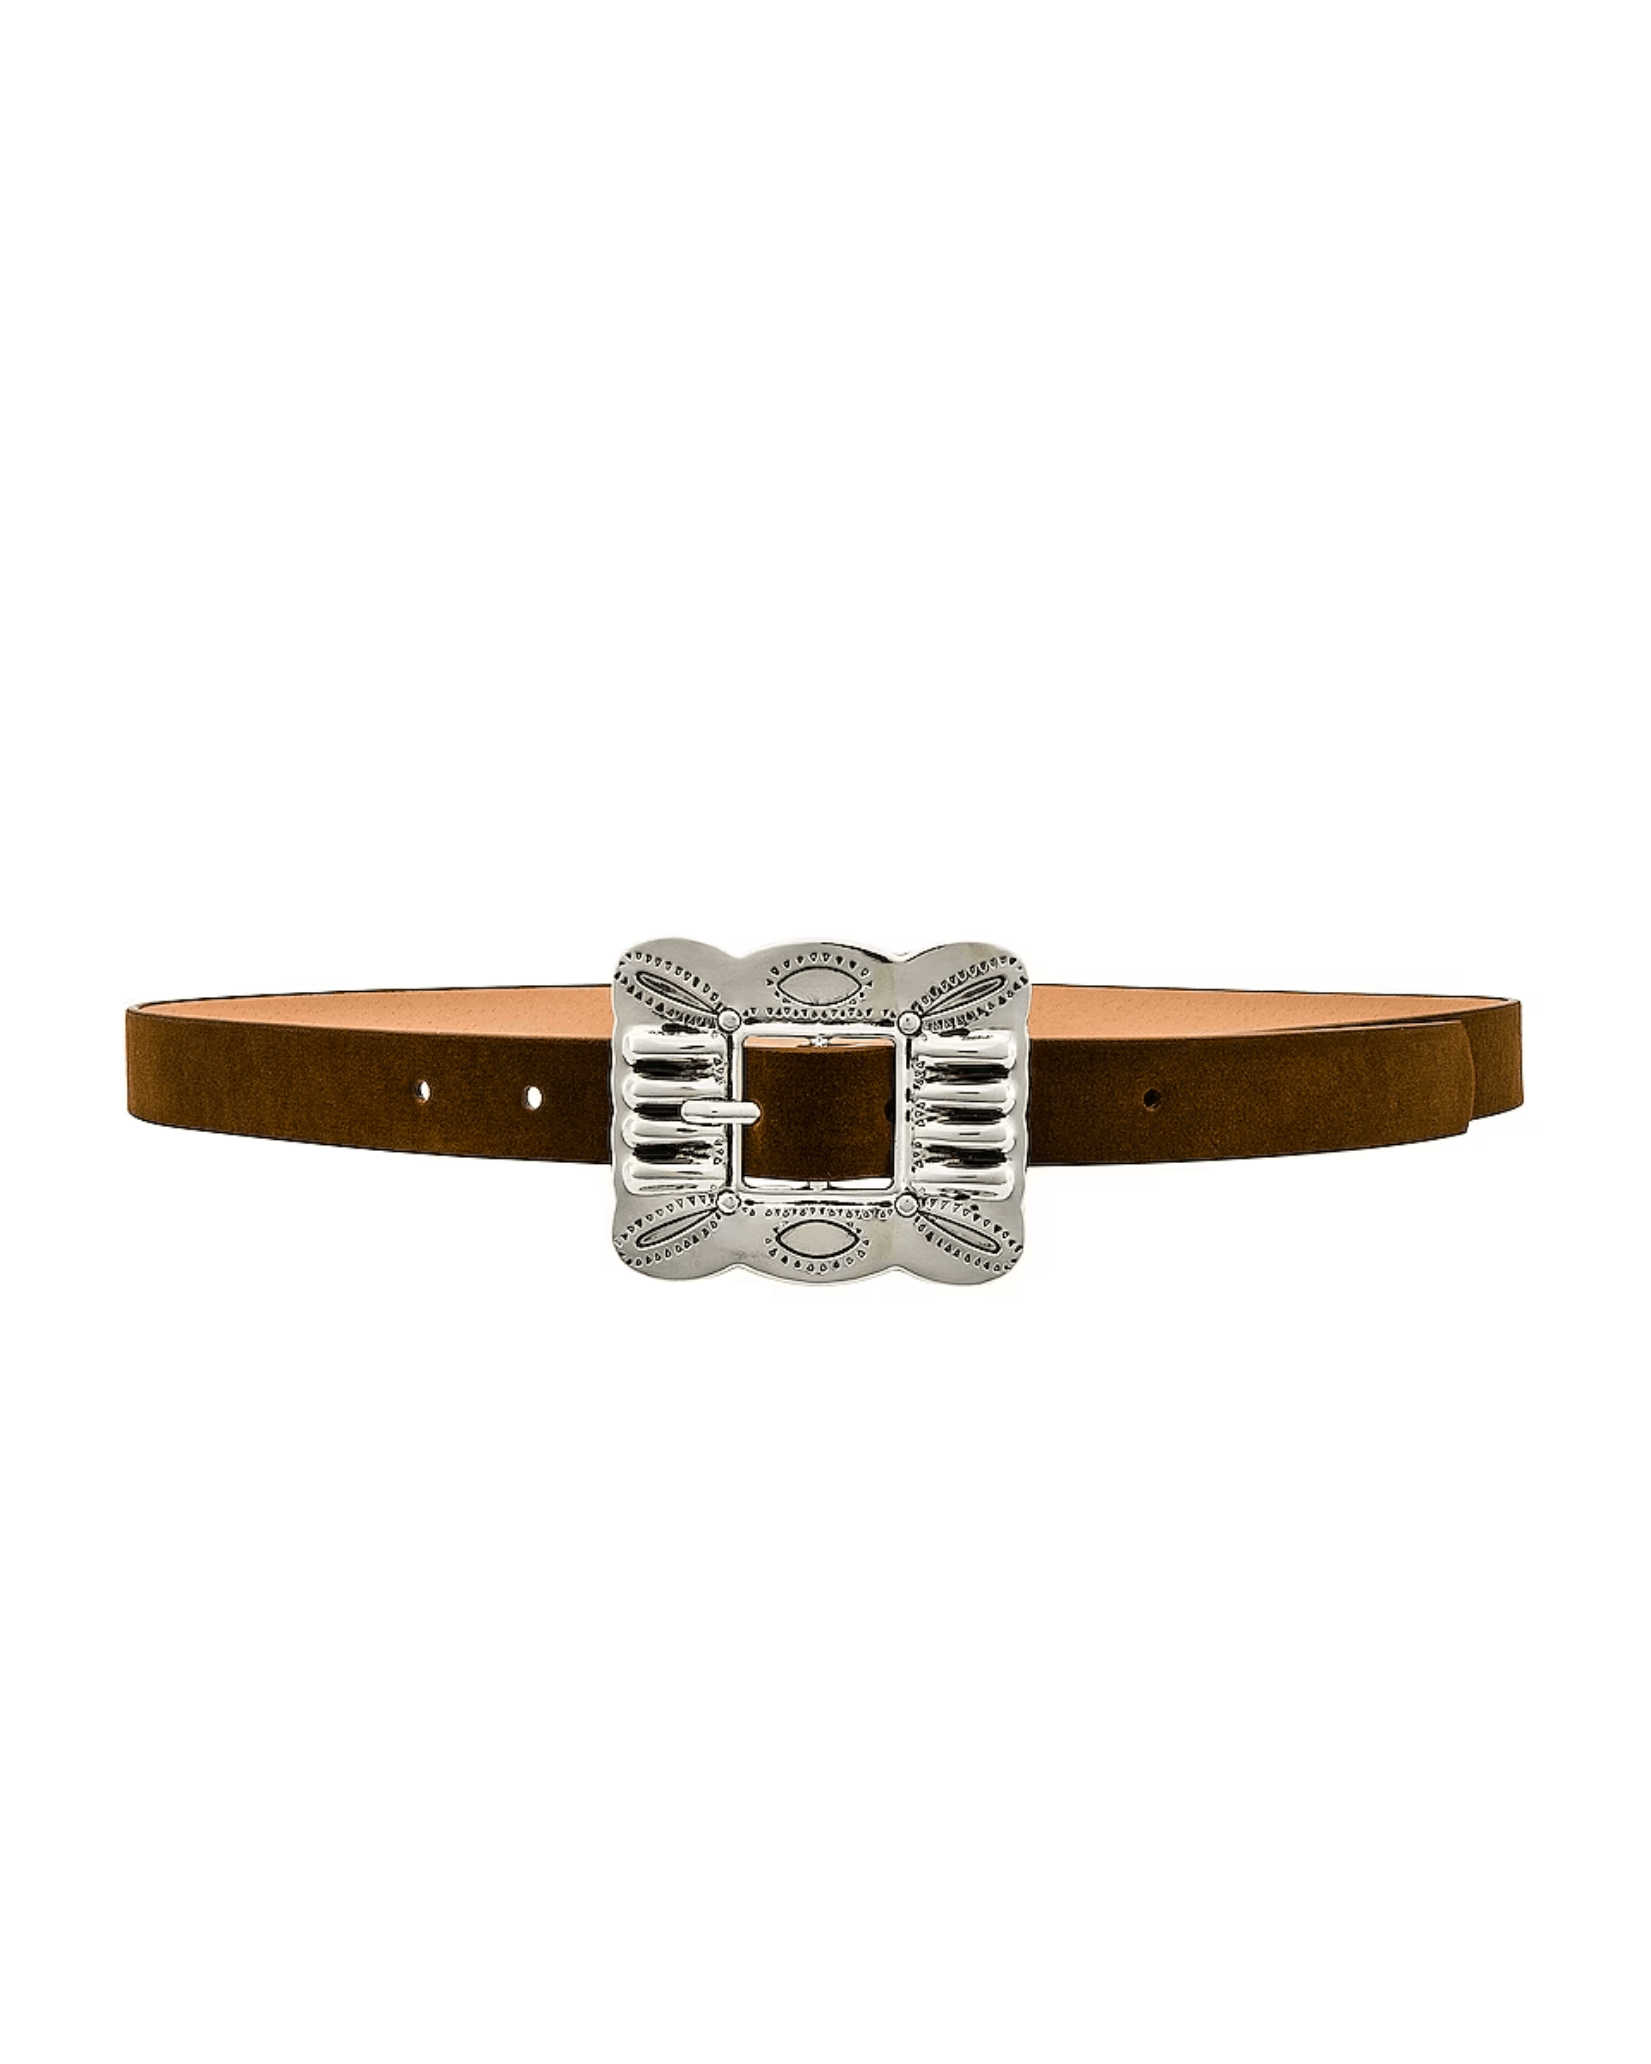 FAUX LEATHER BELT - 8 Other Reasons